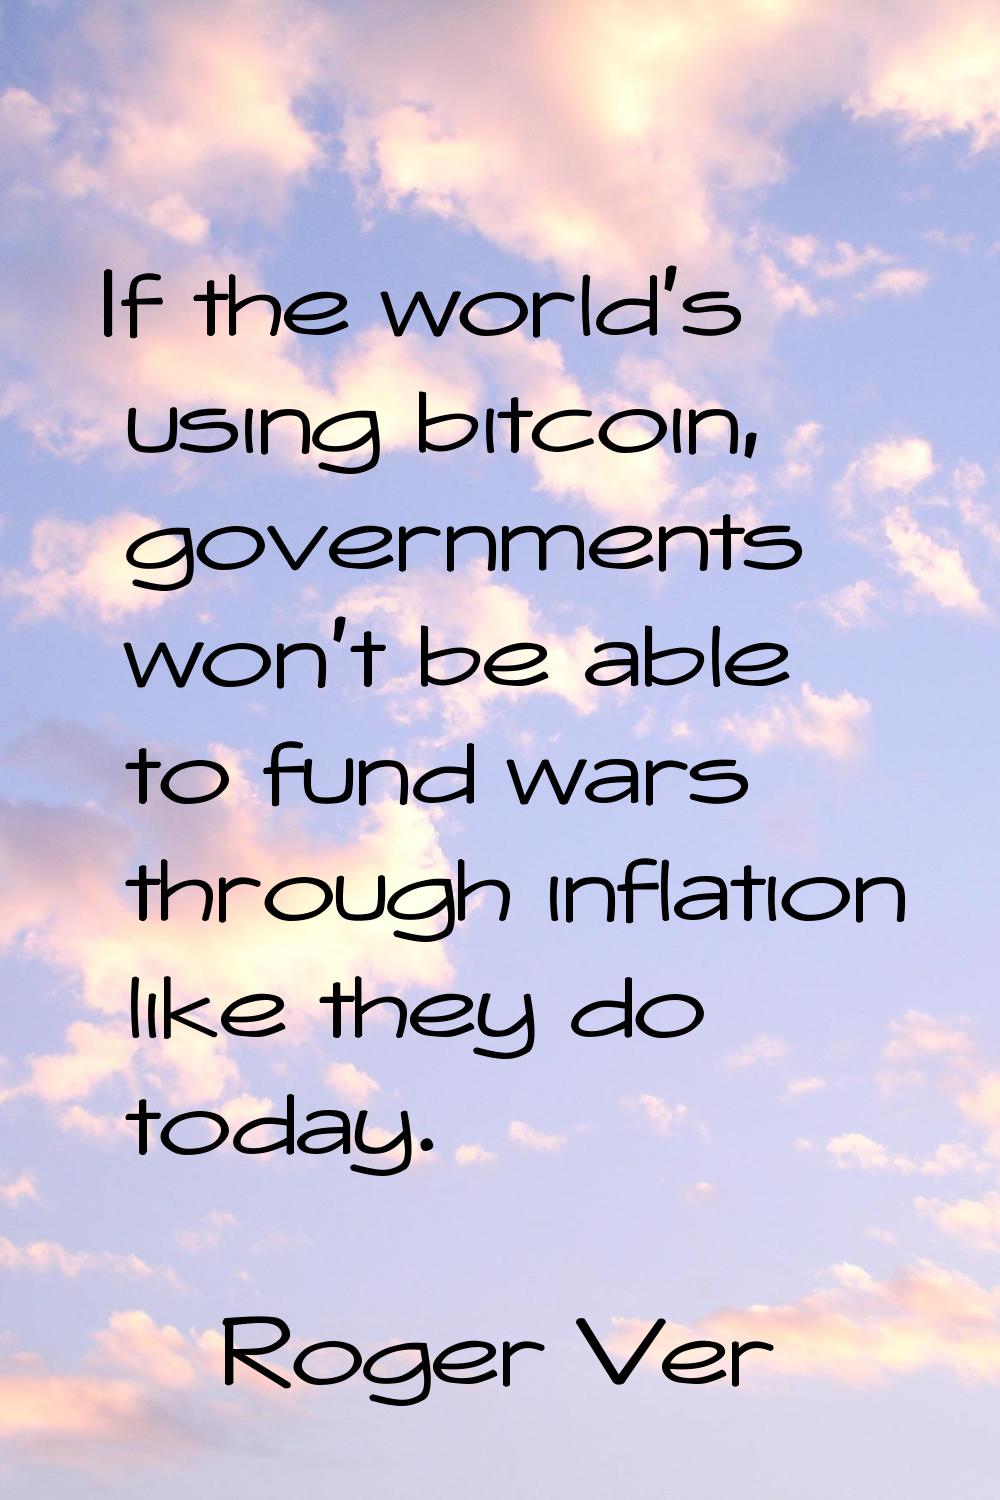 If the world's using bitcoin, governments won't be able to fund wars through inflation like they do